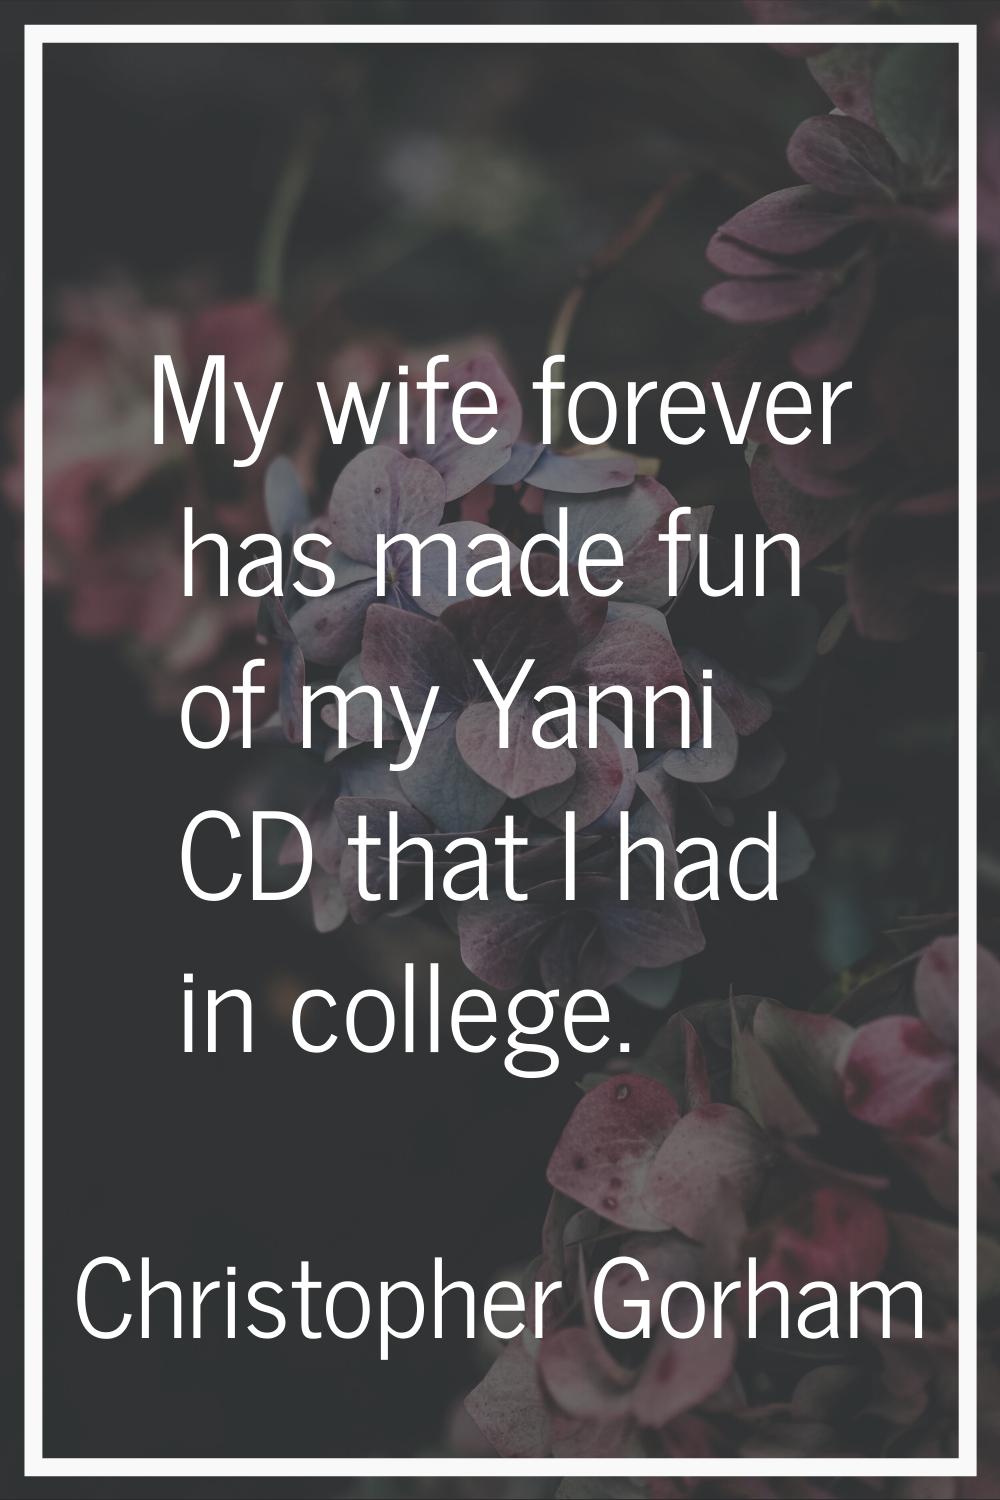 My wife forever has made fun of my Yanni CD that I had in college.